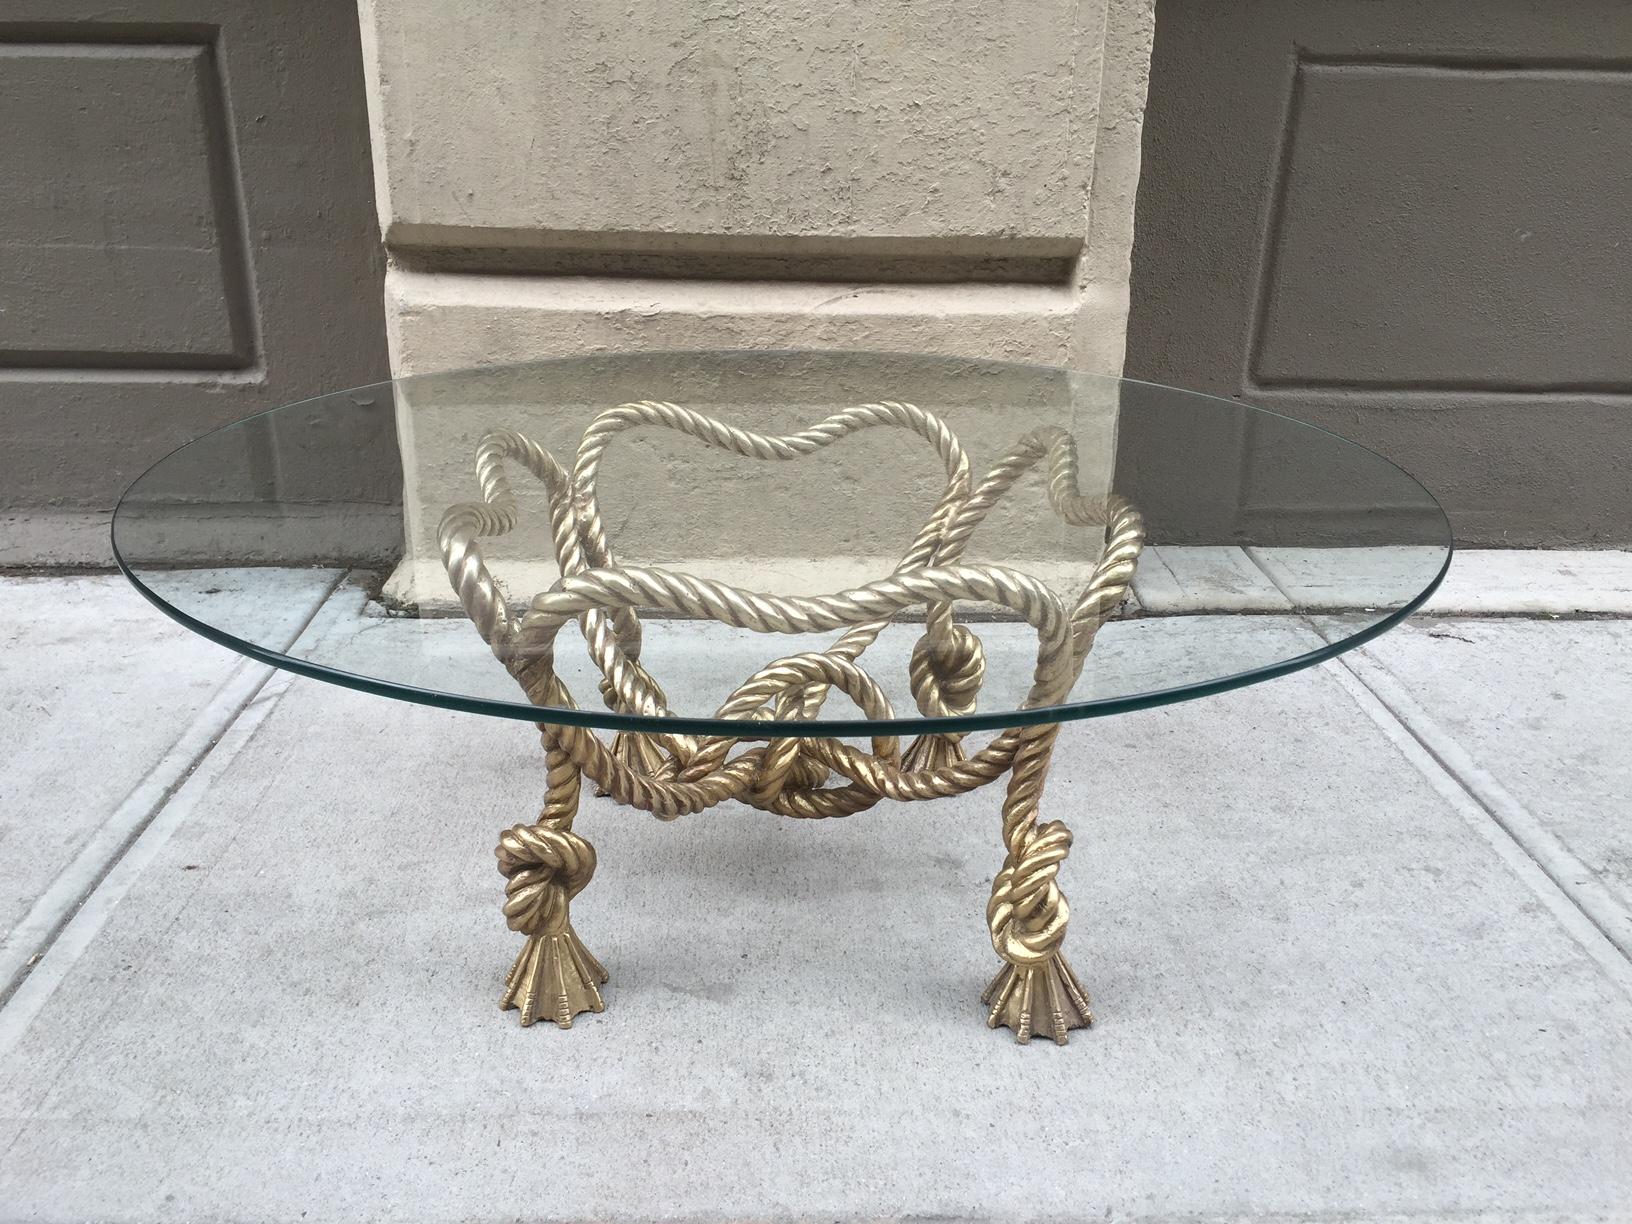 Beautiful solid bronze stylized rope base with a glass top. Manner of Maison Jansen.